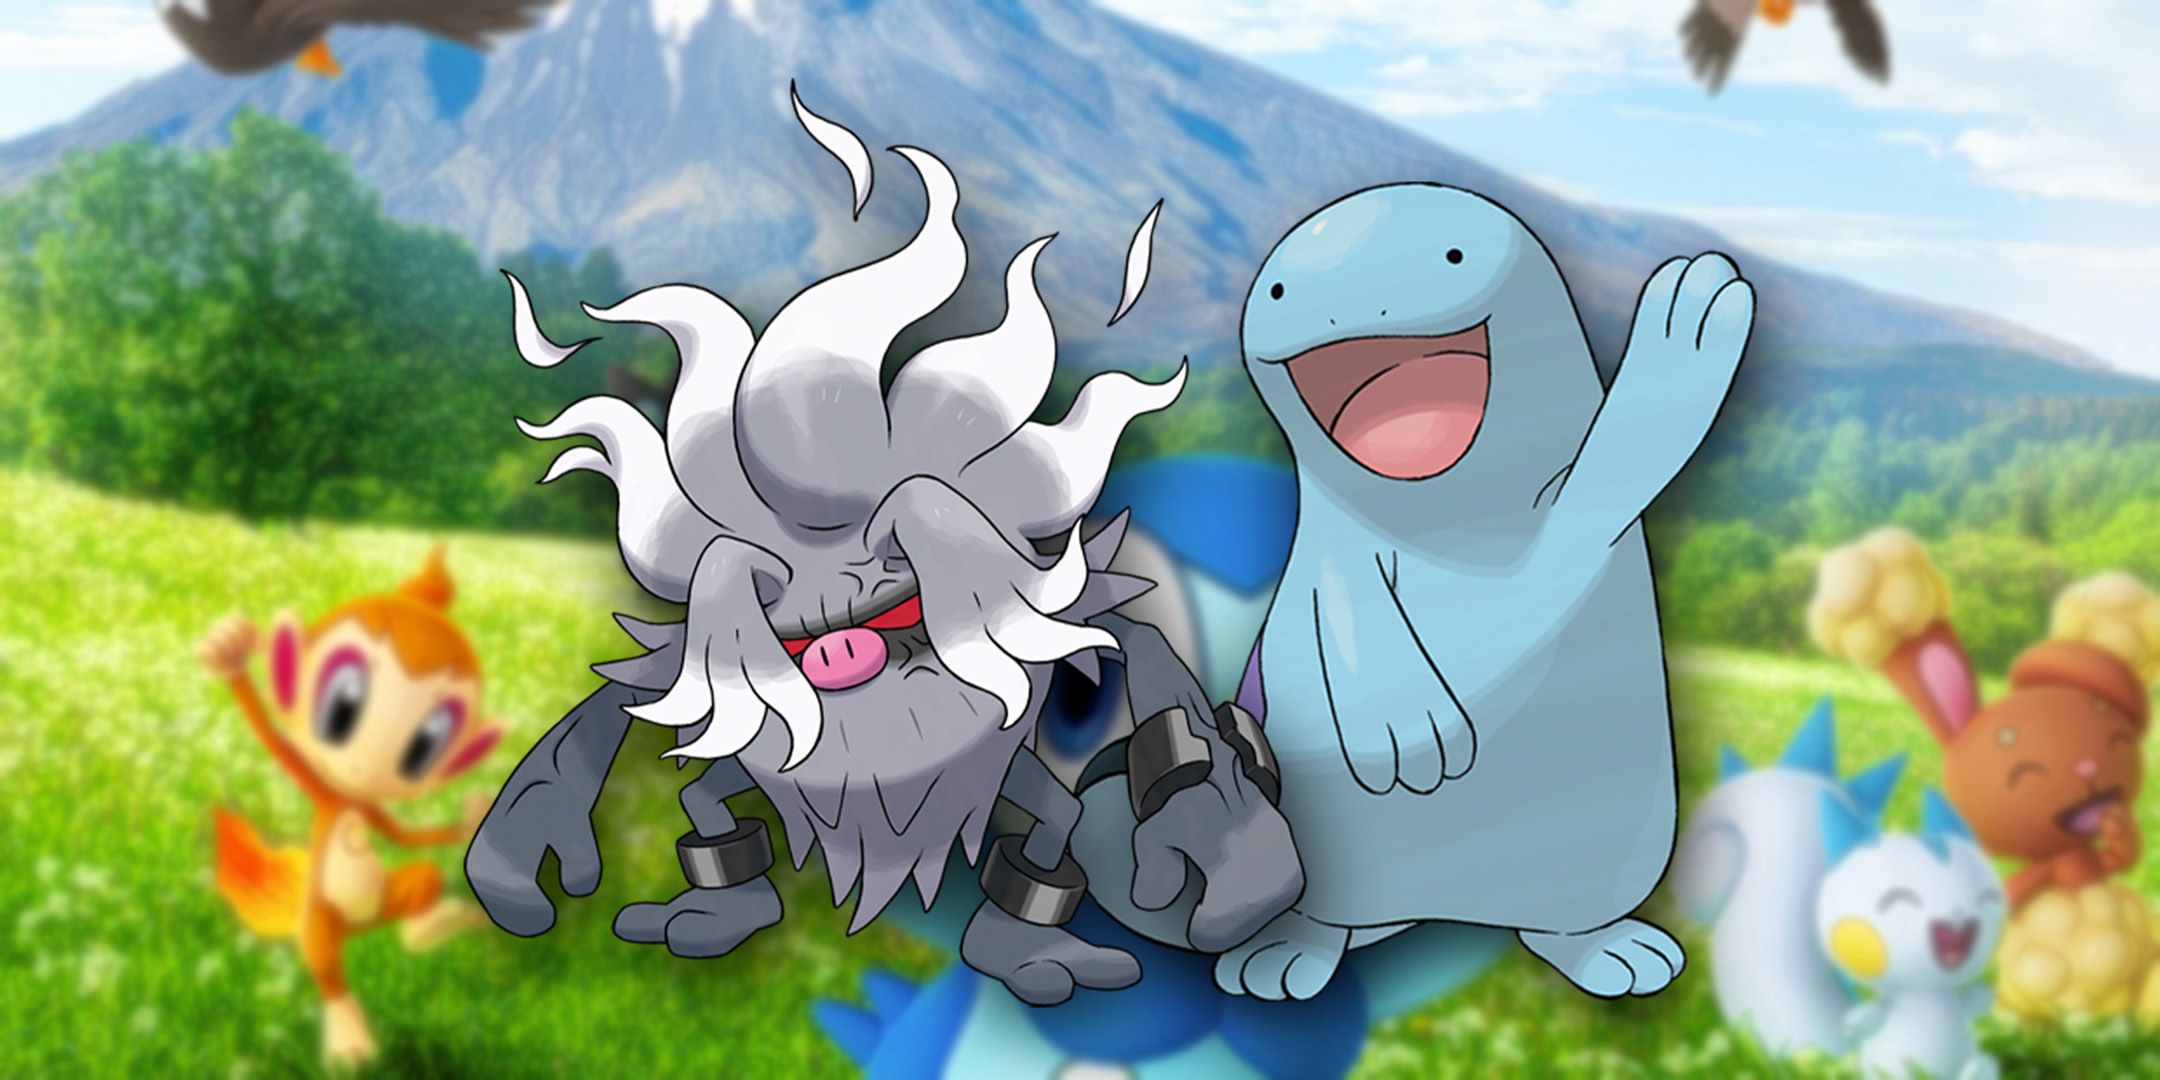 Annihilape and Quagsire standing beside each other in Pokemon GO field